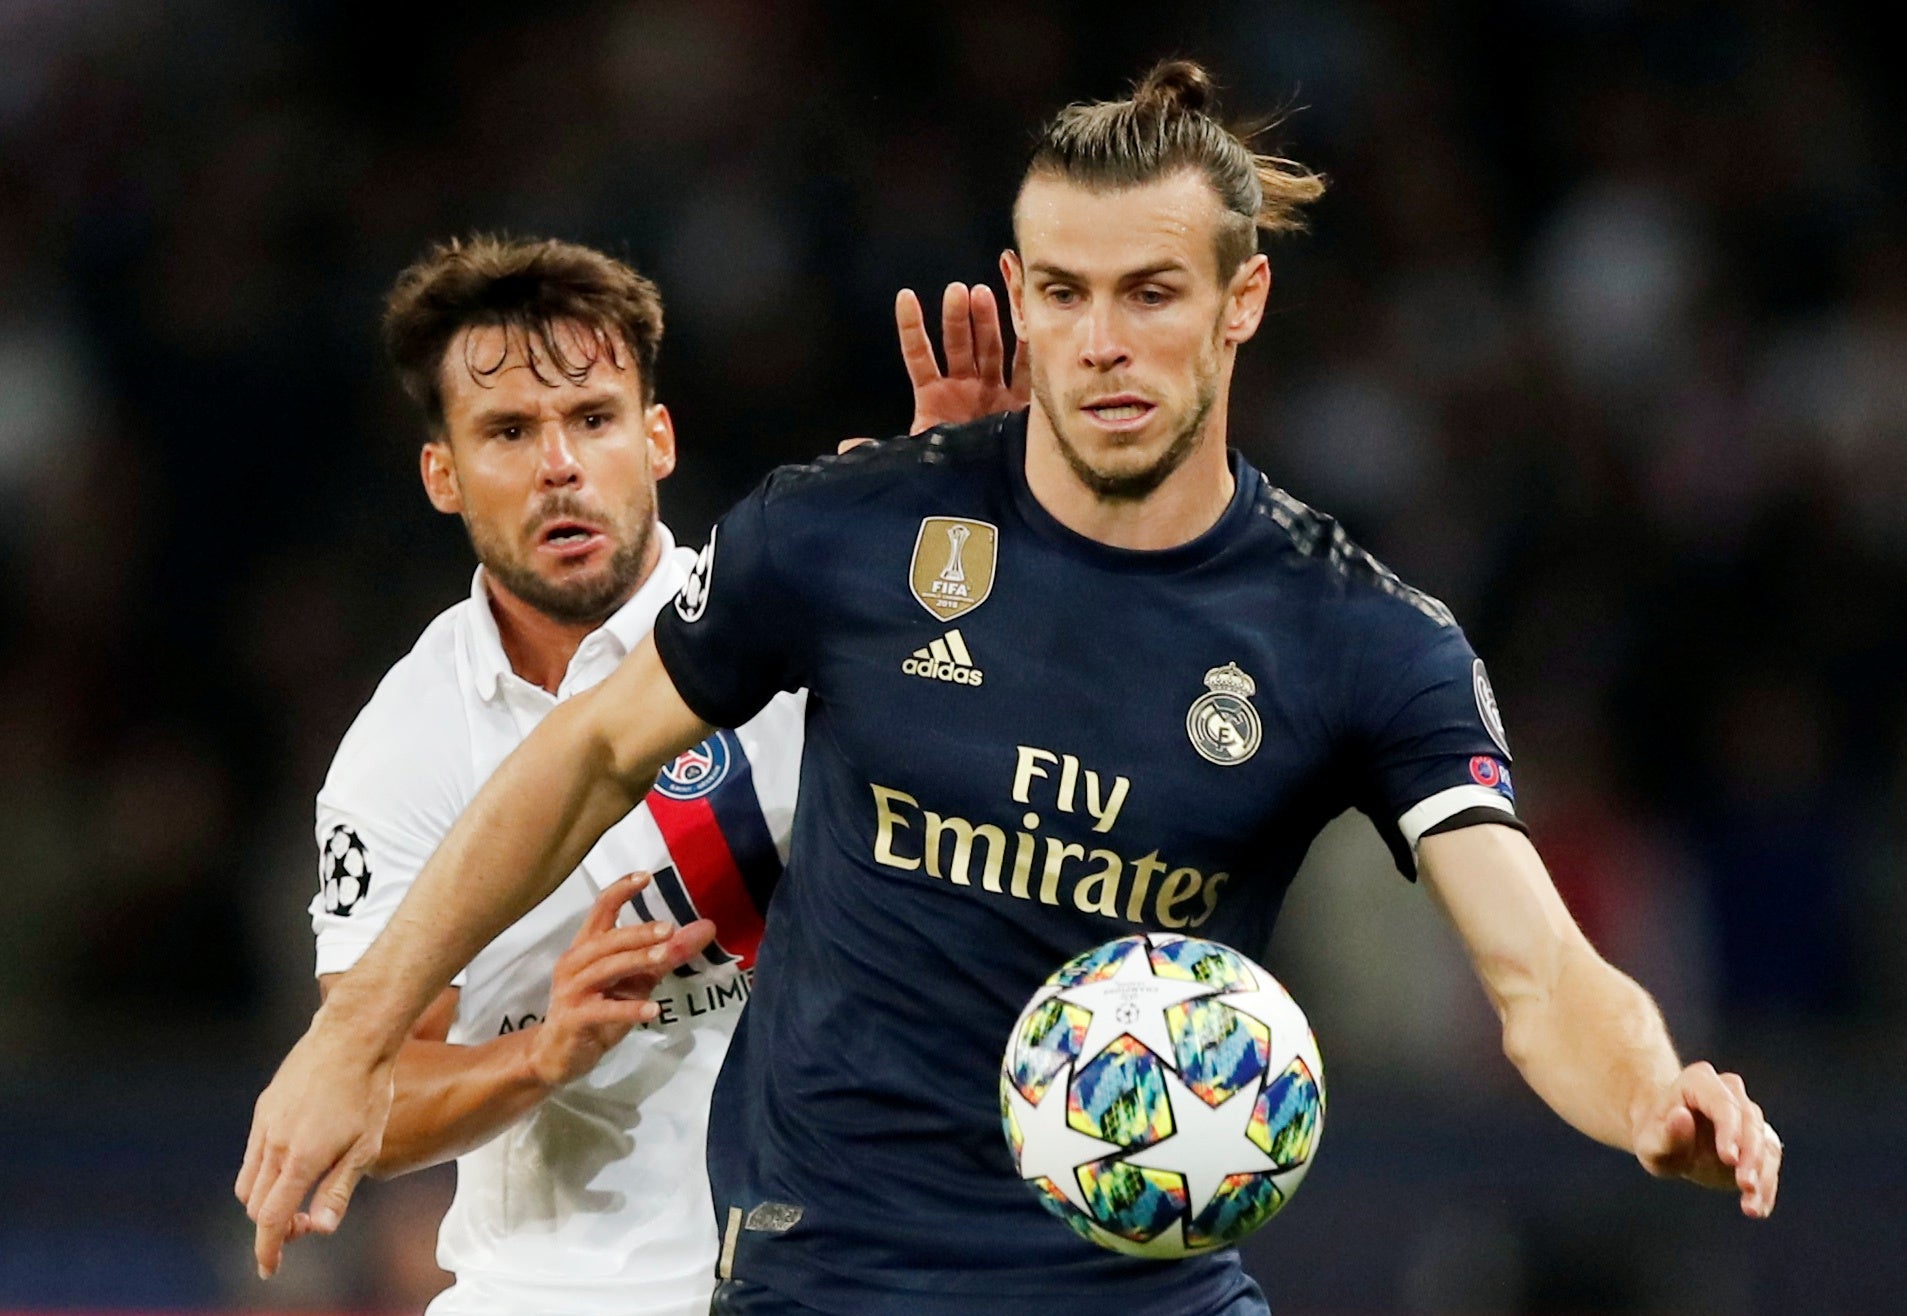 From Milan derby to Real Madrid via PSG, four games to look out for around Europe's big leagues